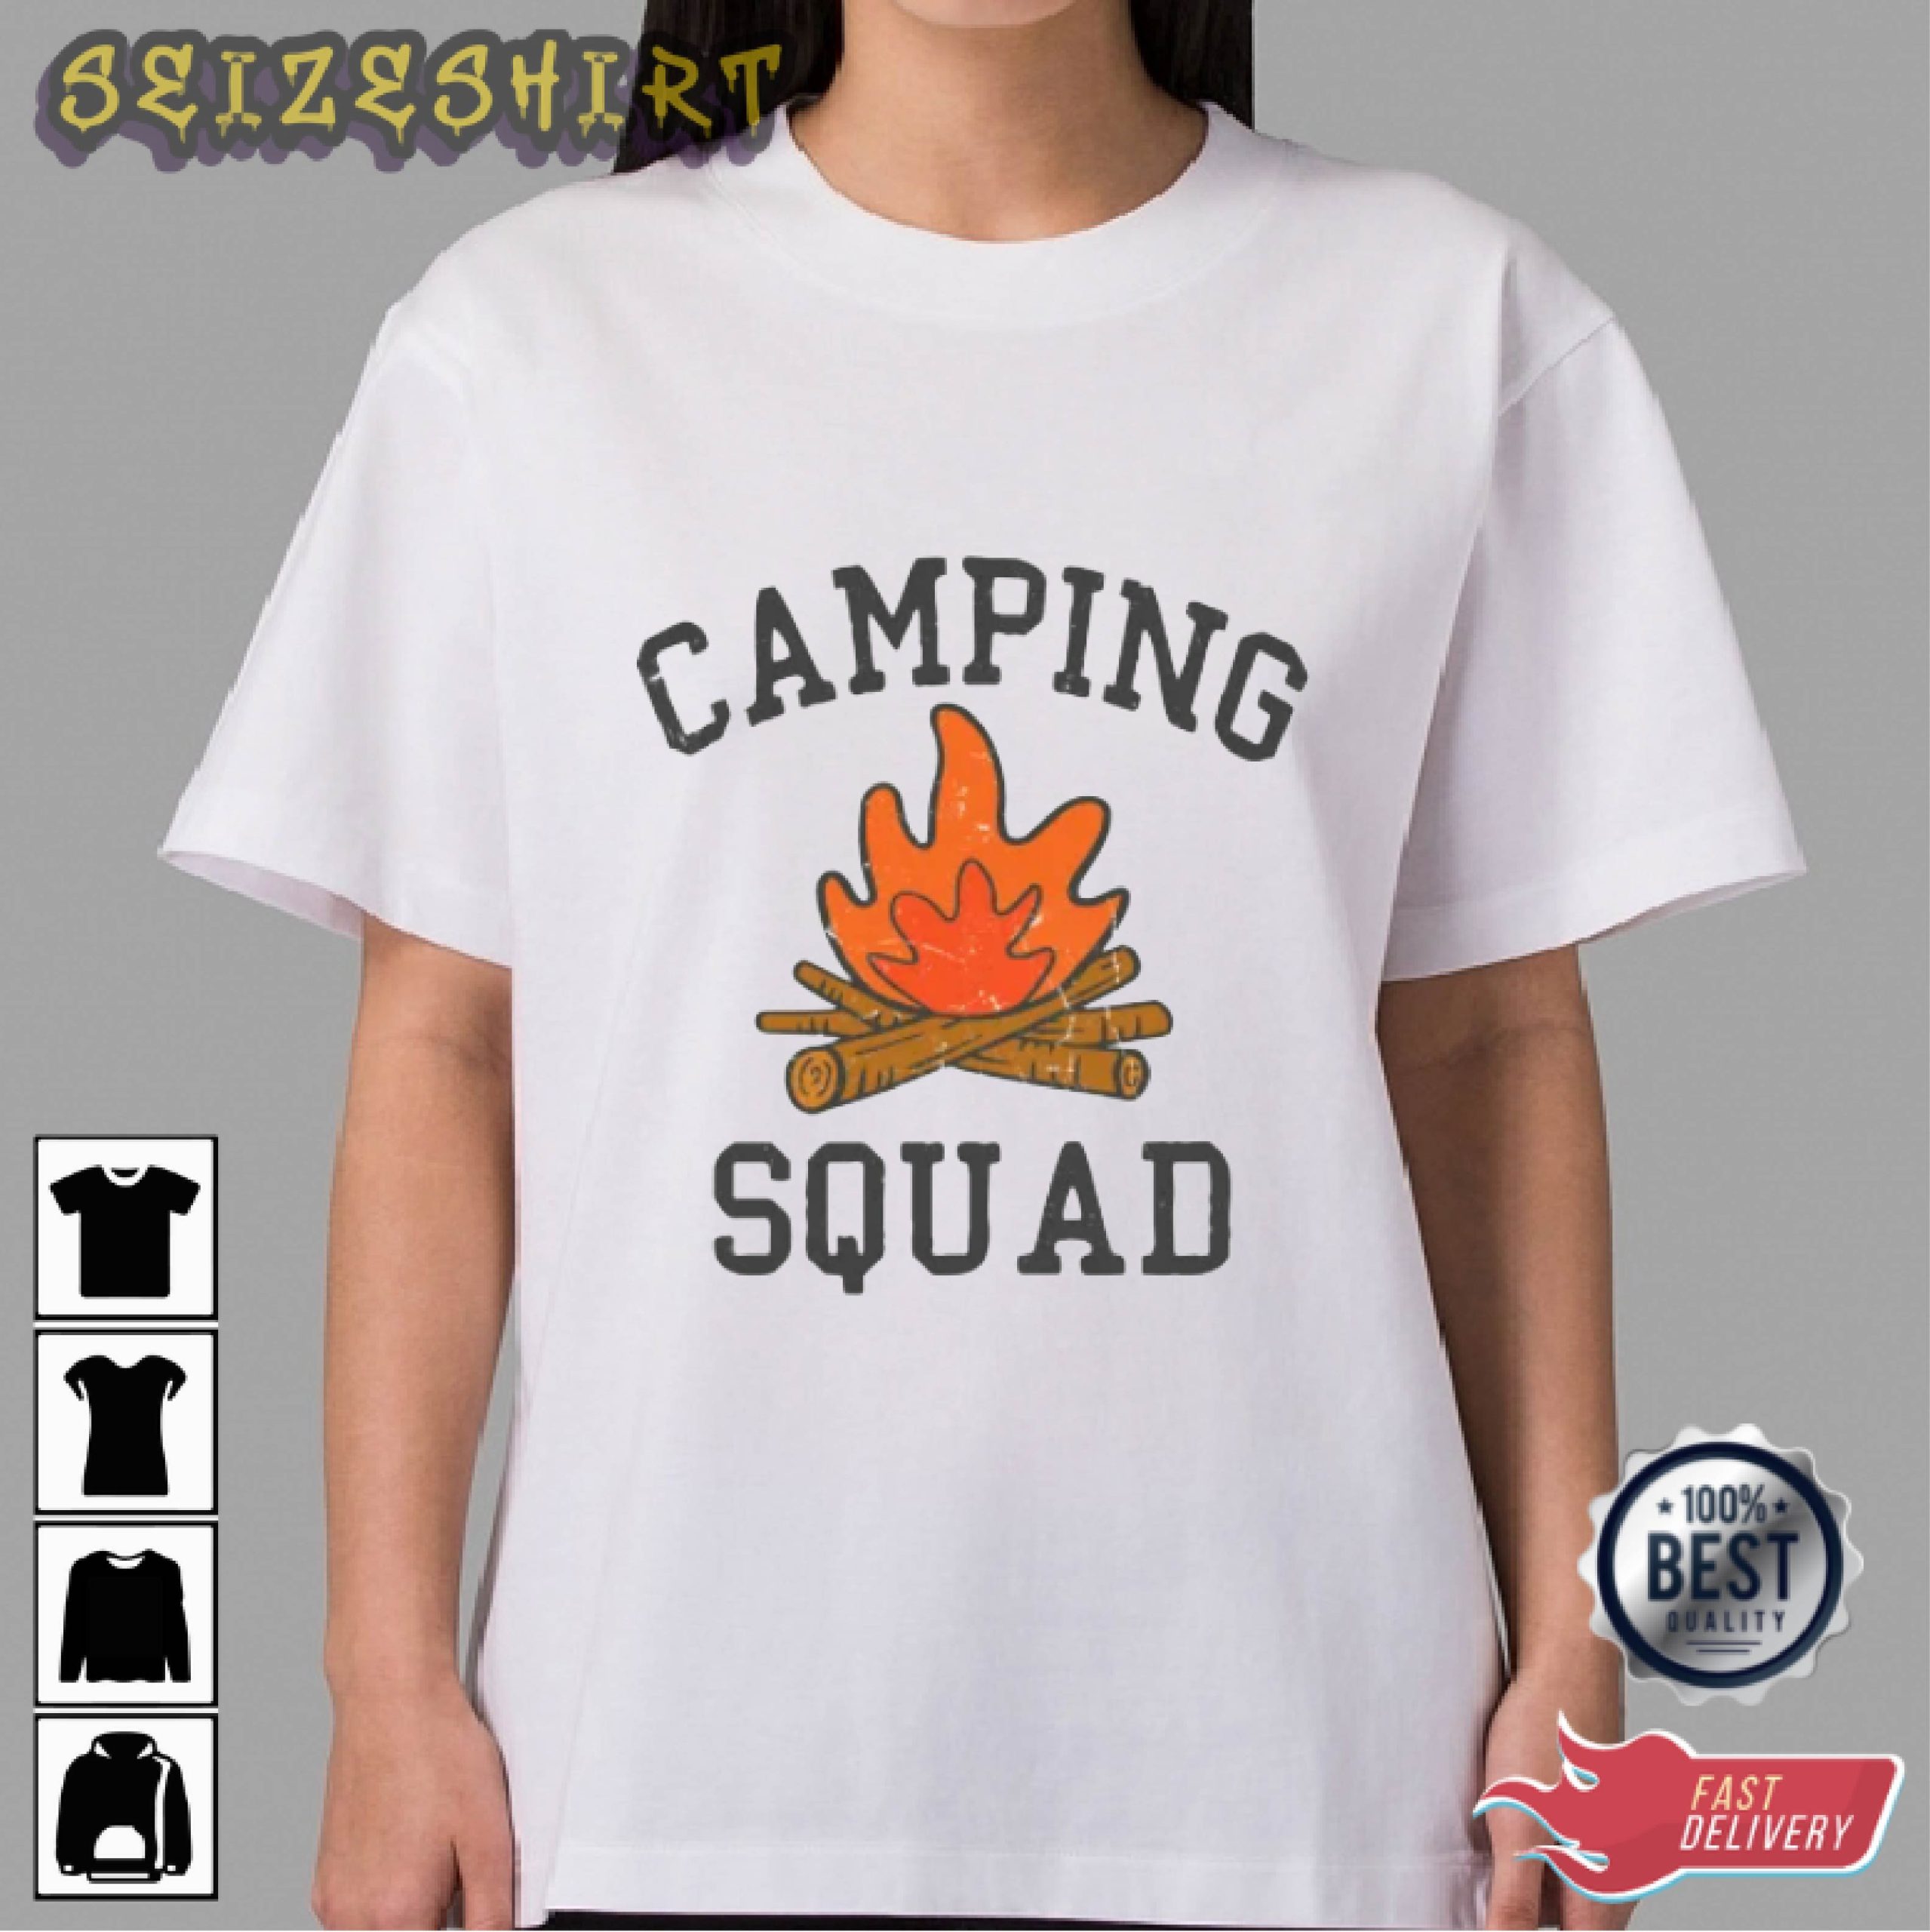 Camping Squad With Camp Fire Graphic Tee